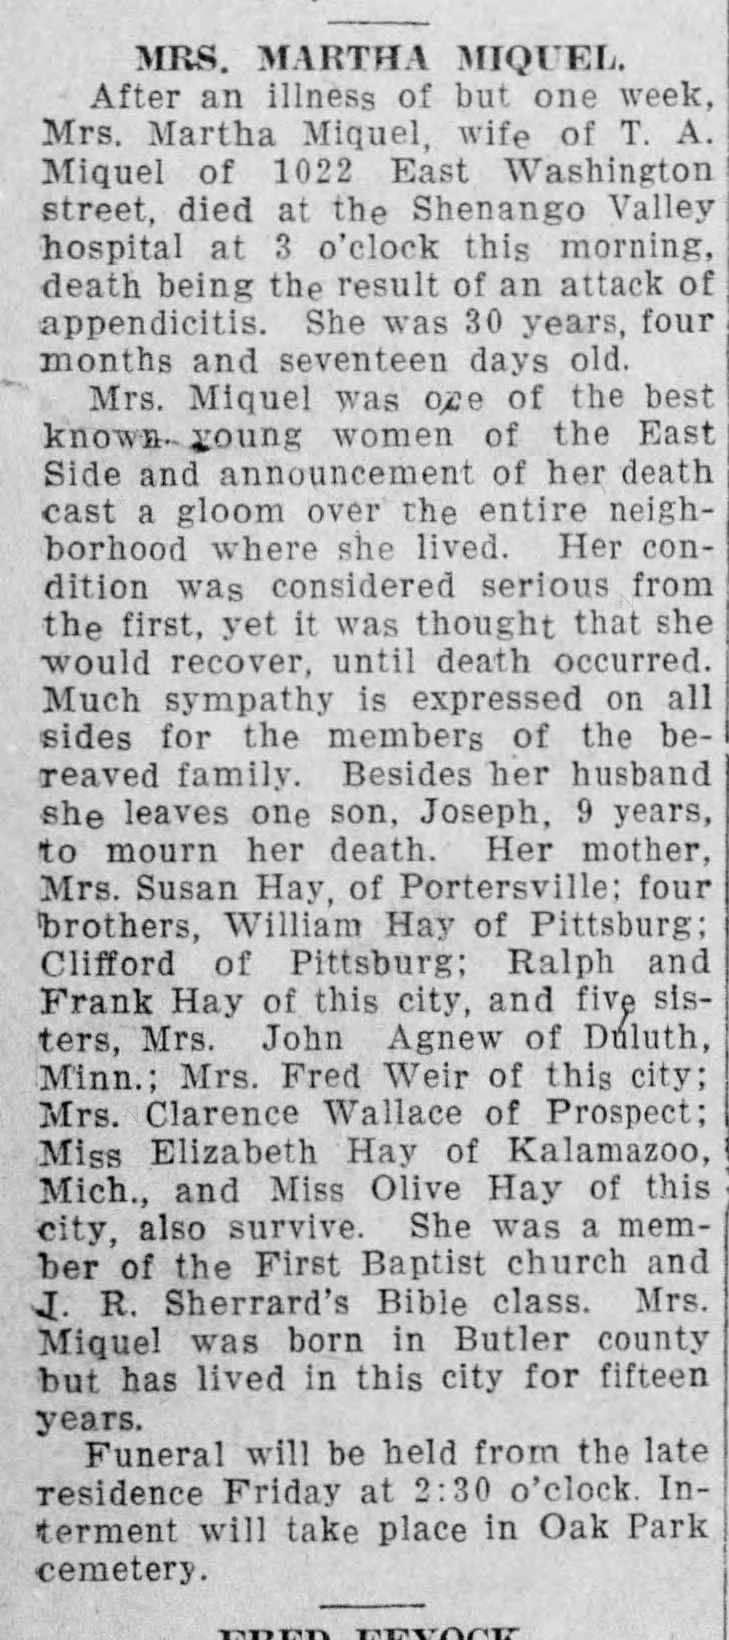 New Castle Herald, New Castle, Pennsylvania, 2 Oct 1912, Wednesday, page 10